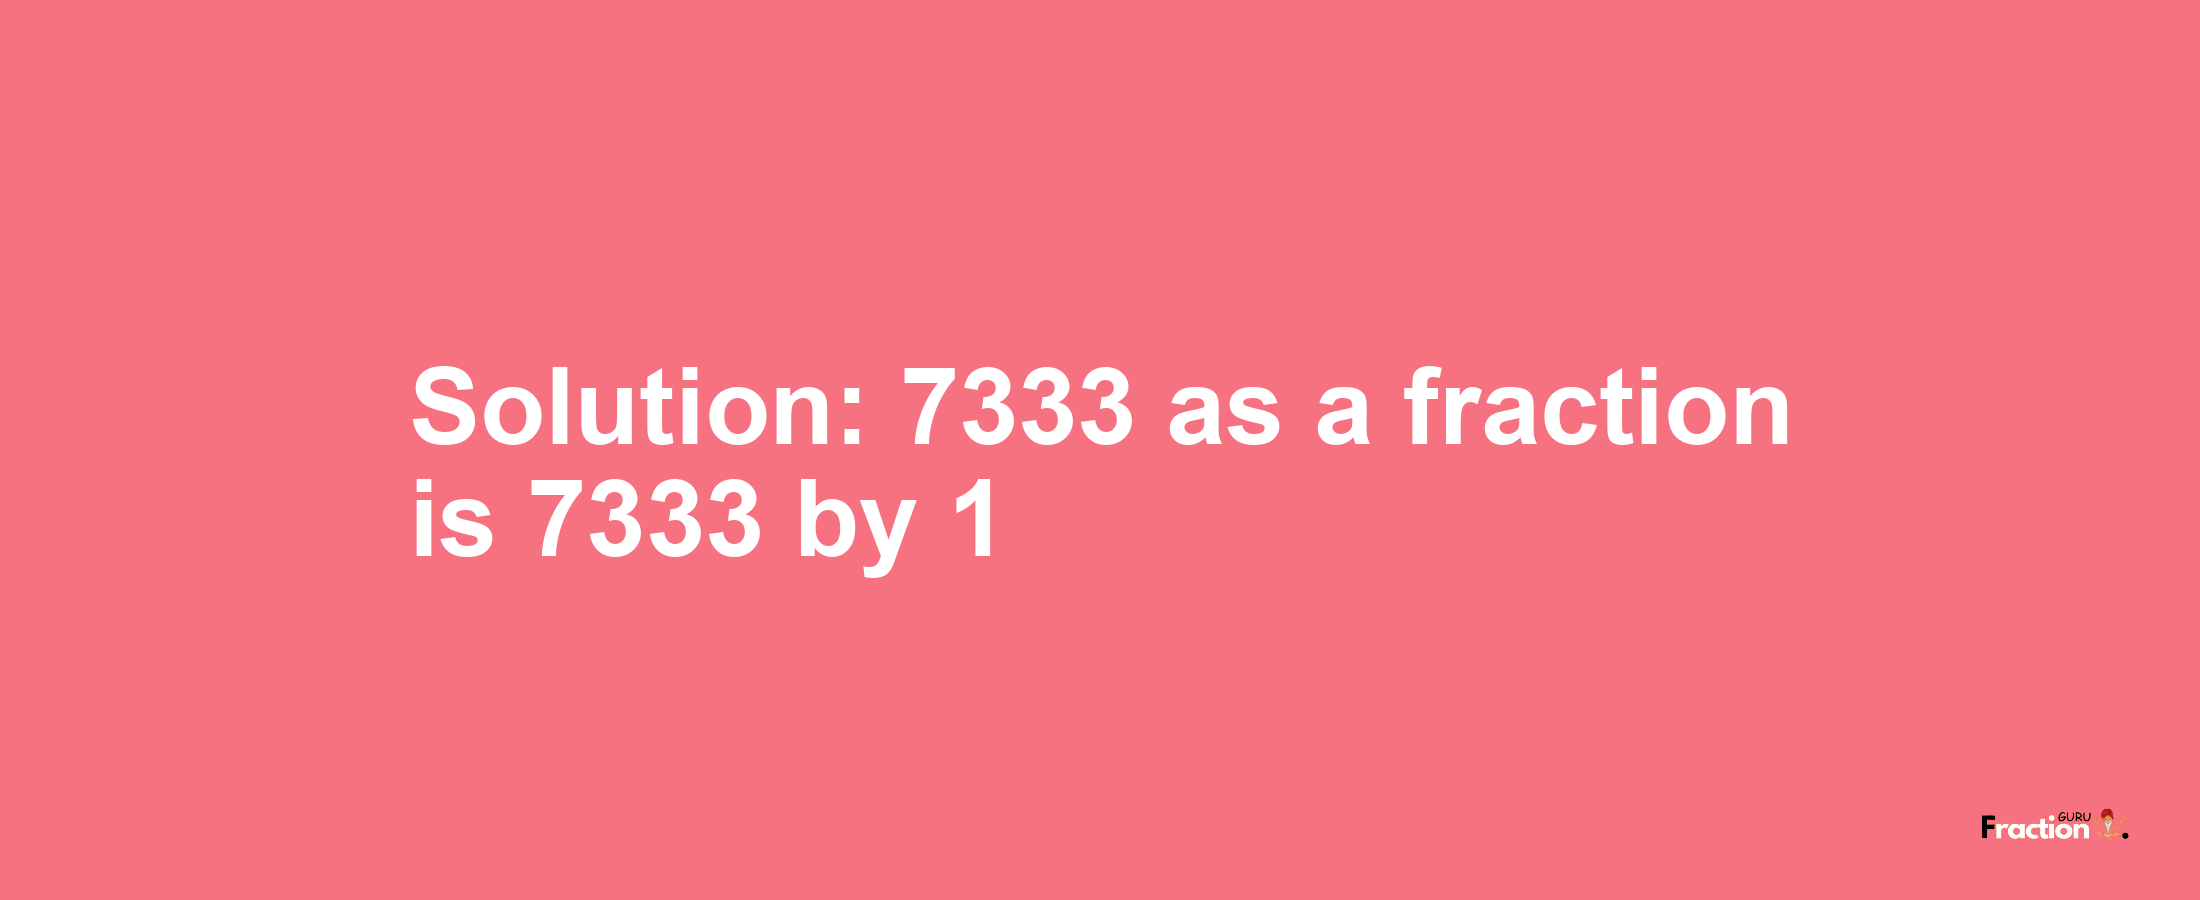 Solution:7333 as a fraction is 7333/1